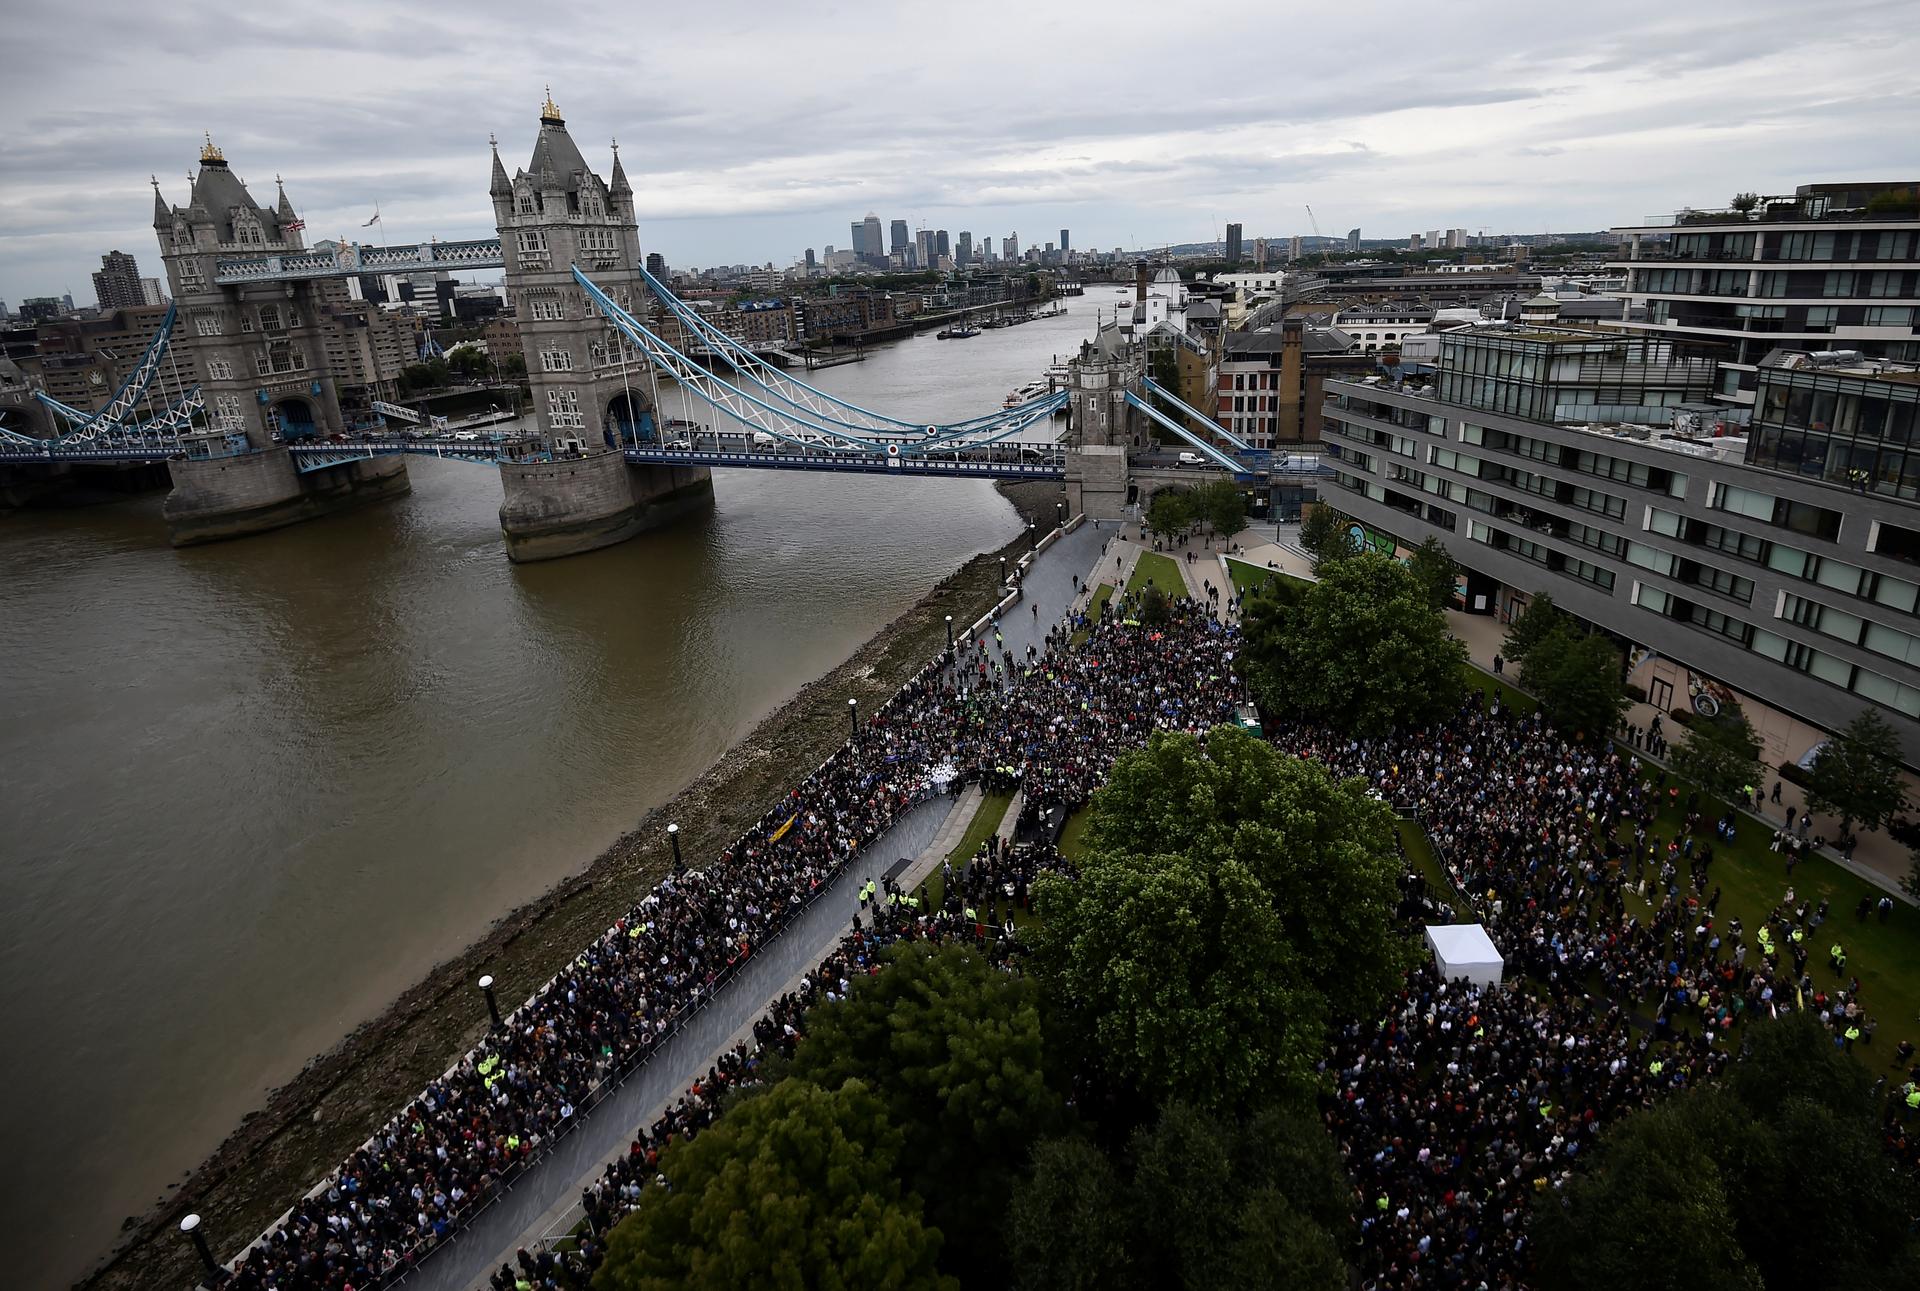 People attend a vigil to remember the victims of the attack on London Bridge and Borough Market, at Potters Field Park, in central London, Britain, June 5, 2017.